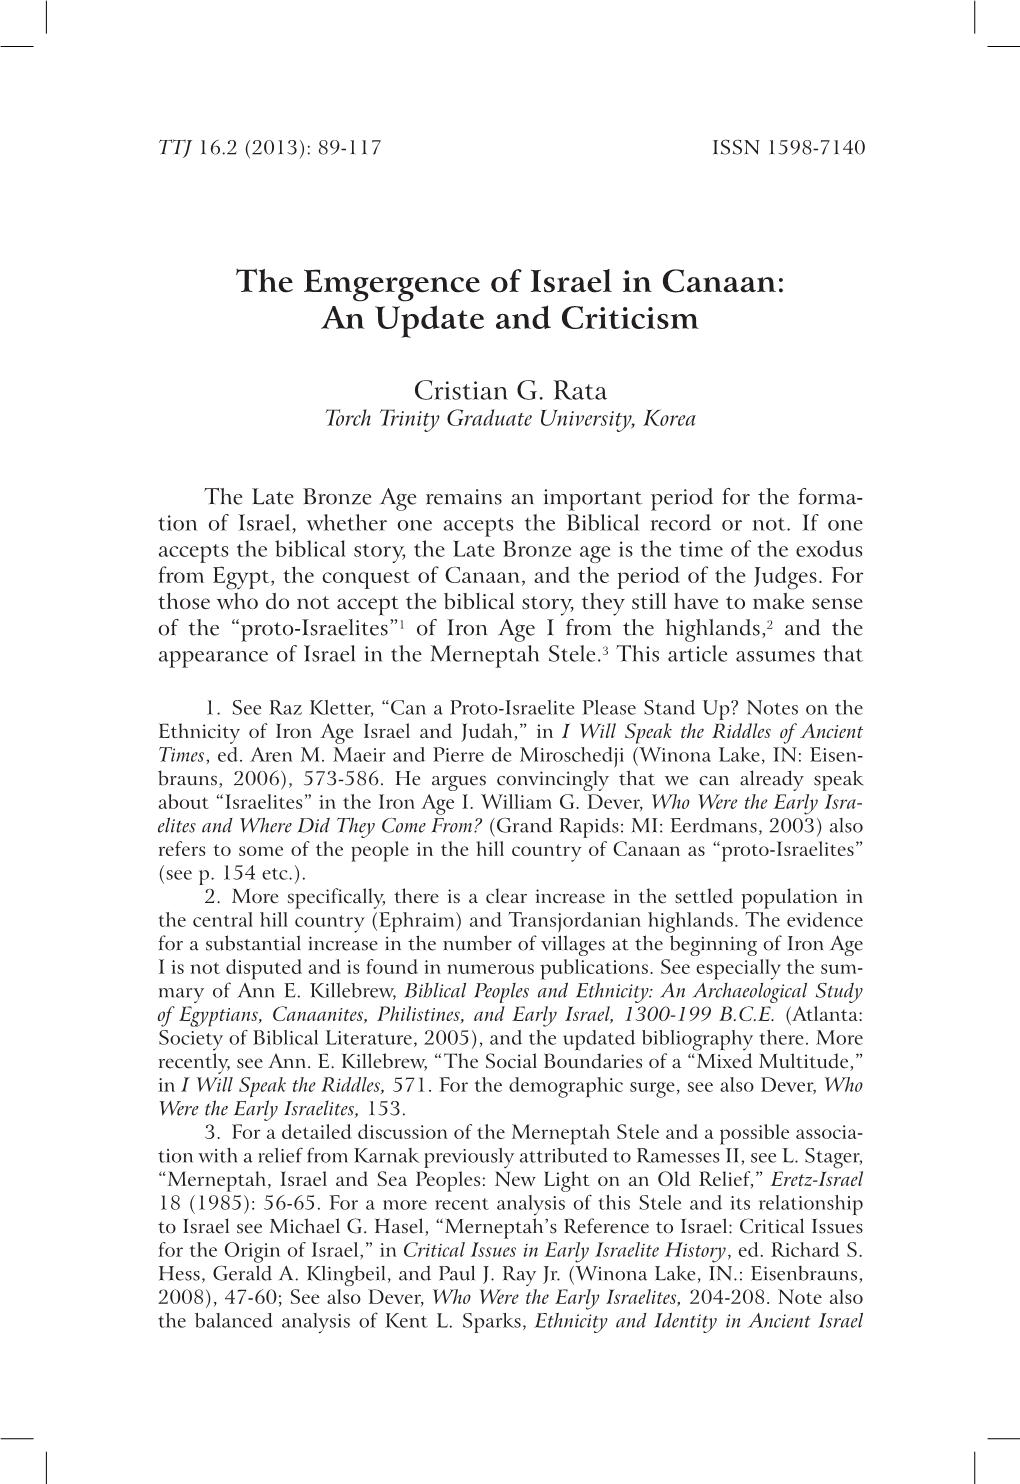 The Emgergence of Israel in Canaan: an Update and Criticism